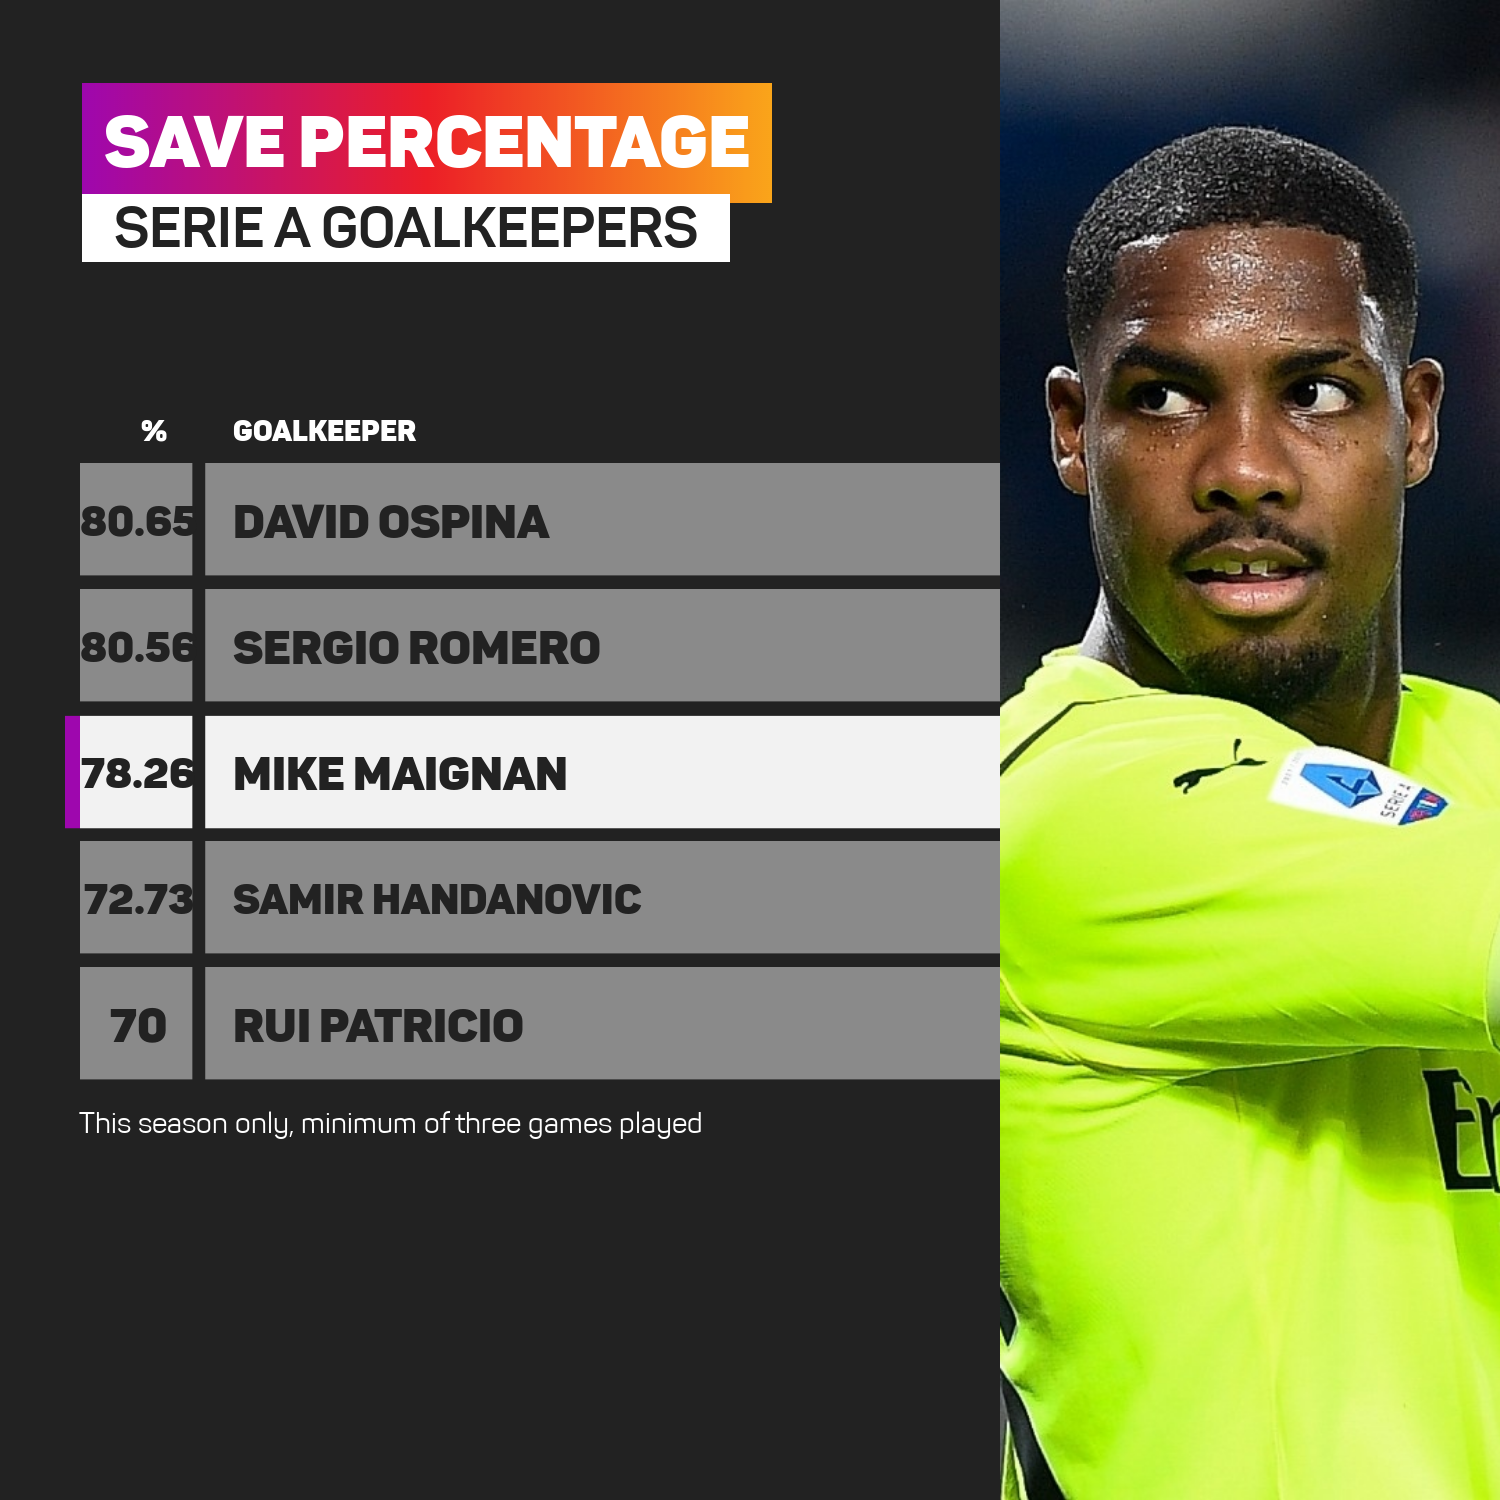 Mike Maignan has performed well for Milan when fit this season